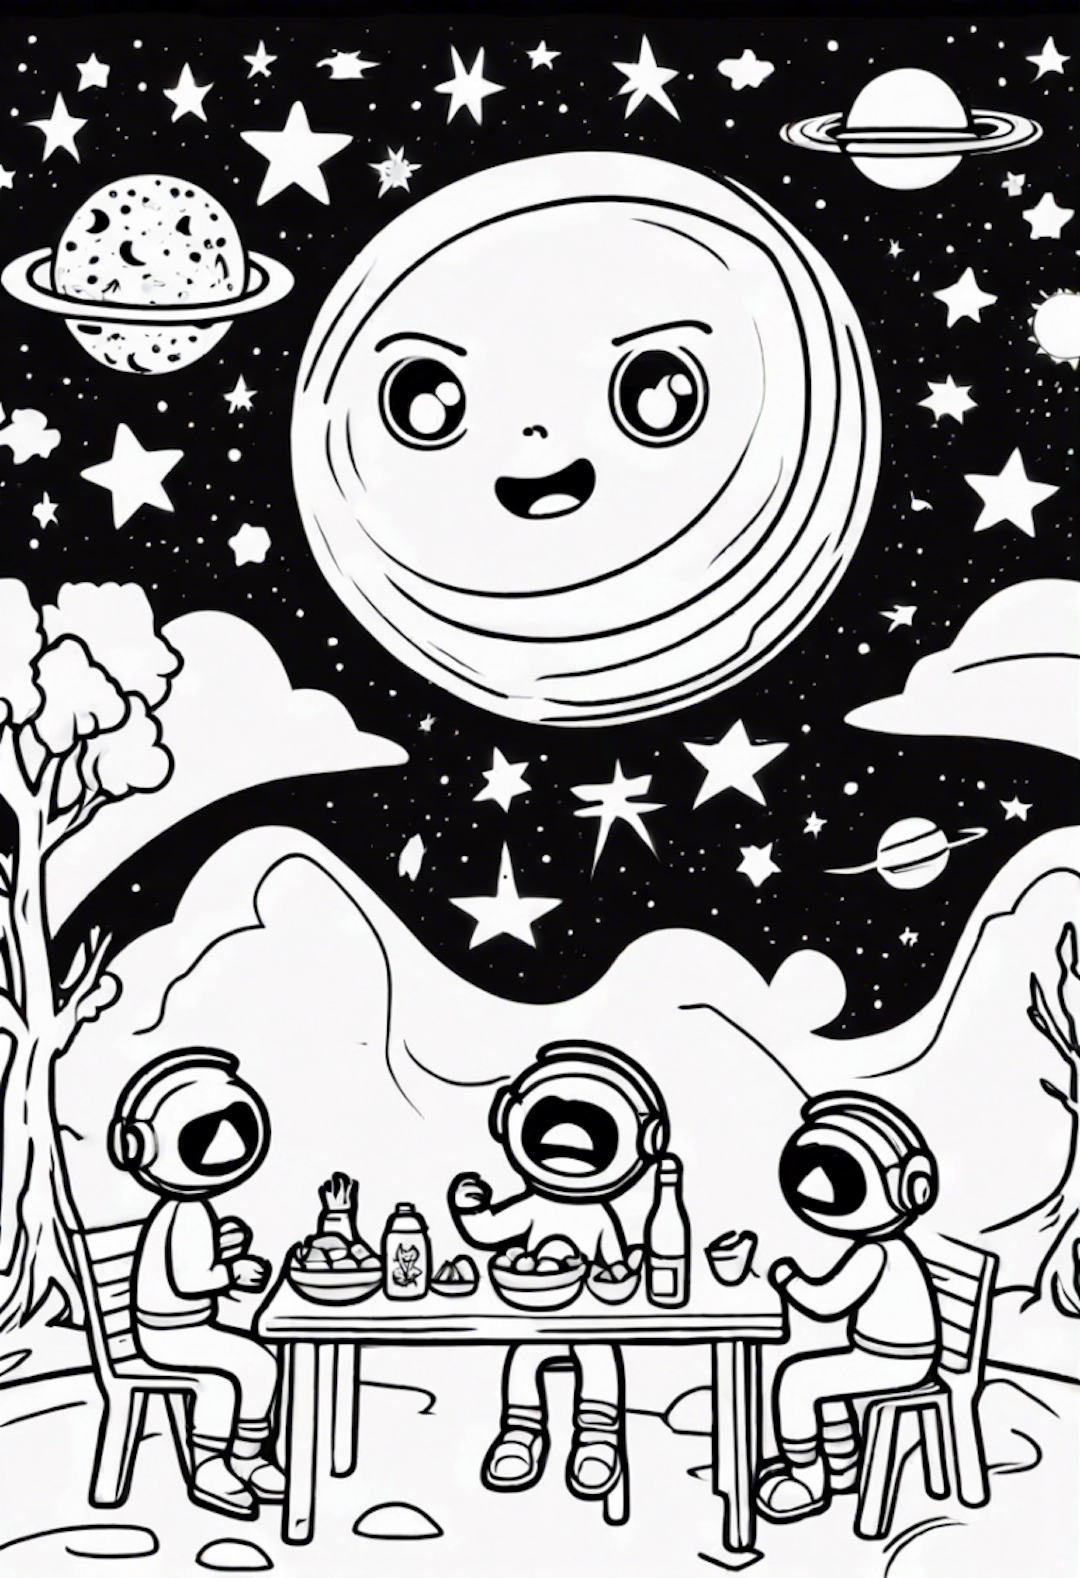 Luna’s Astronaut Picnic Under the Stars coloring pages